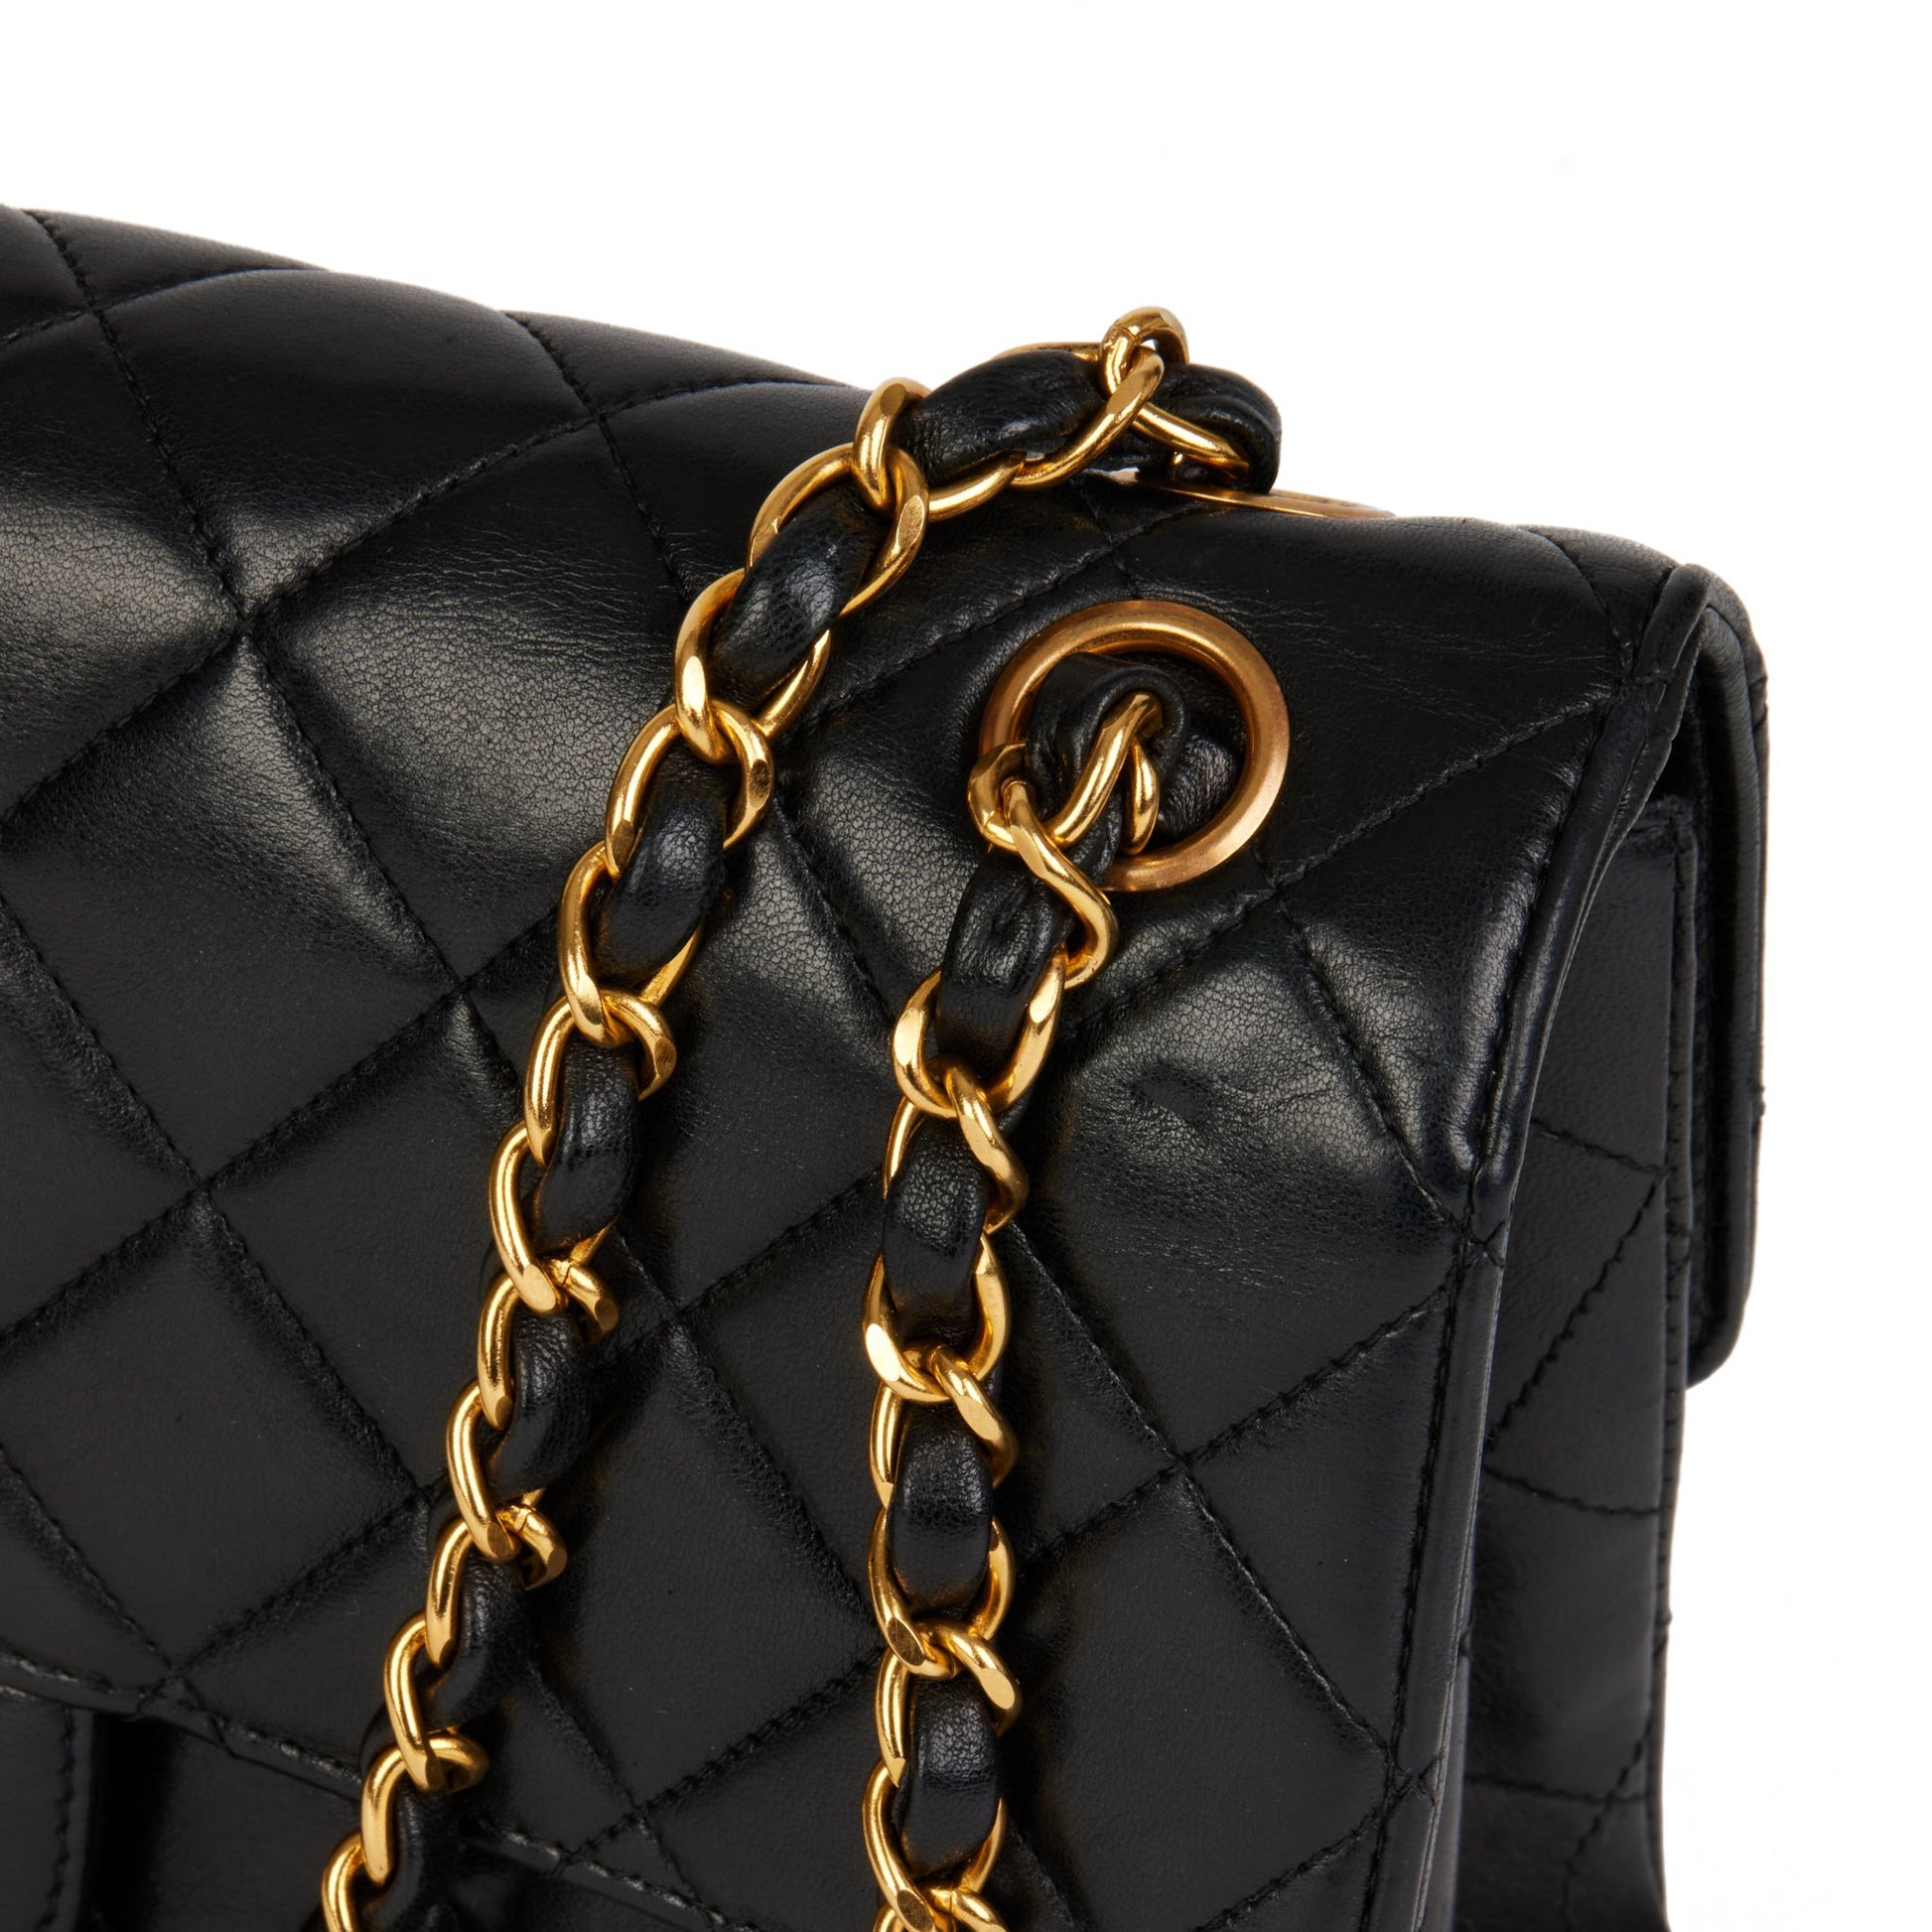 CHANEL DOUBLE SIDED CLASSIC FLAP HANDBAG, black quilted leather with iconic  diamond pattern, gold hardware, chain and leather intervowen shoulder  strap, leather matching interior, inside sticker 4582565, 22cm x 14cm H x